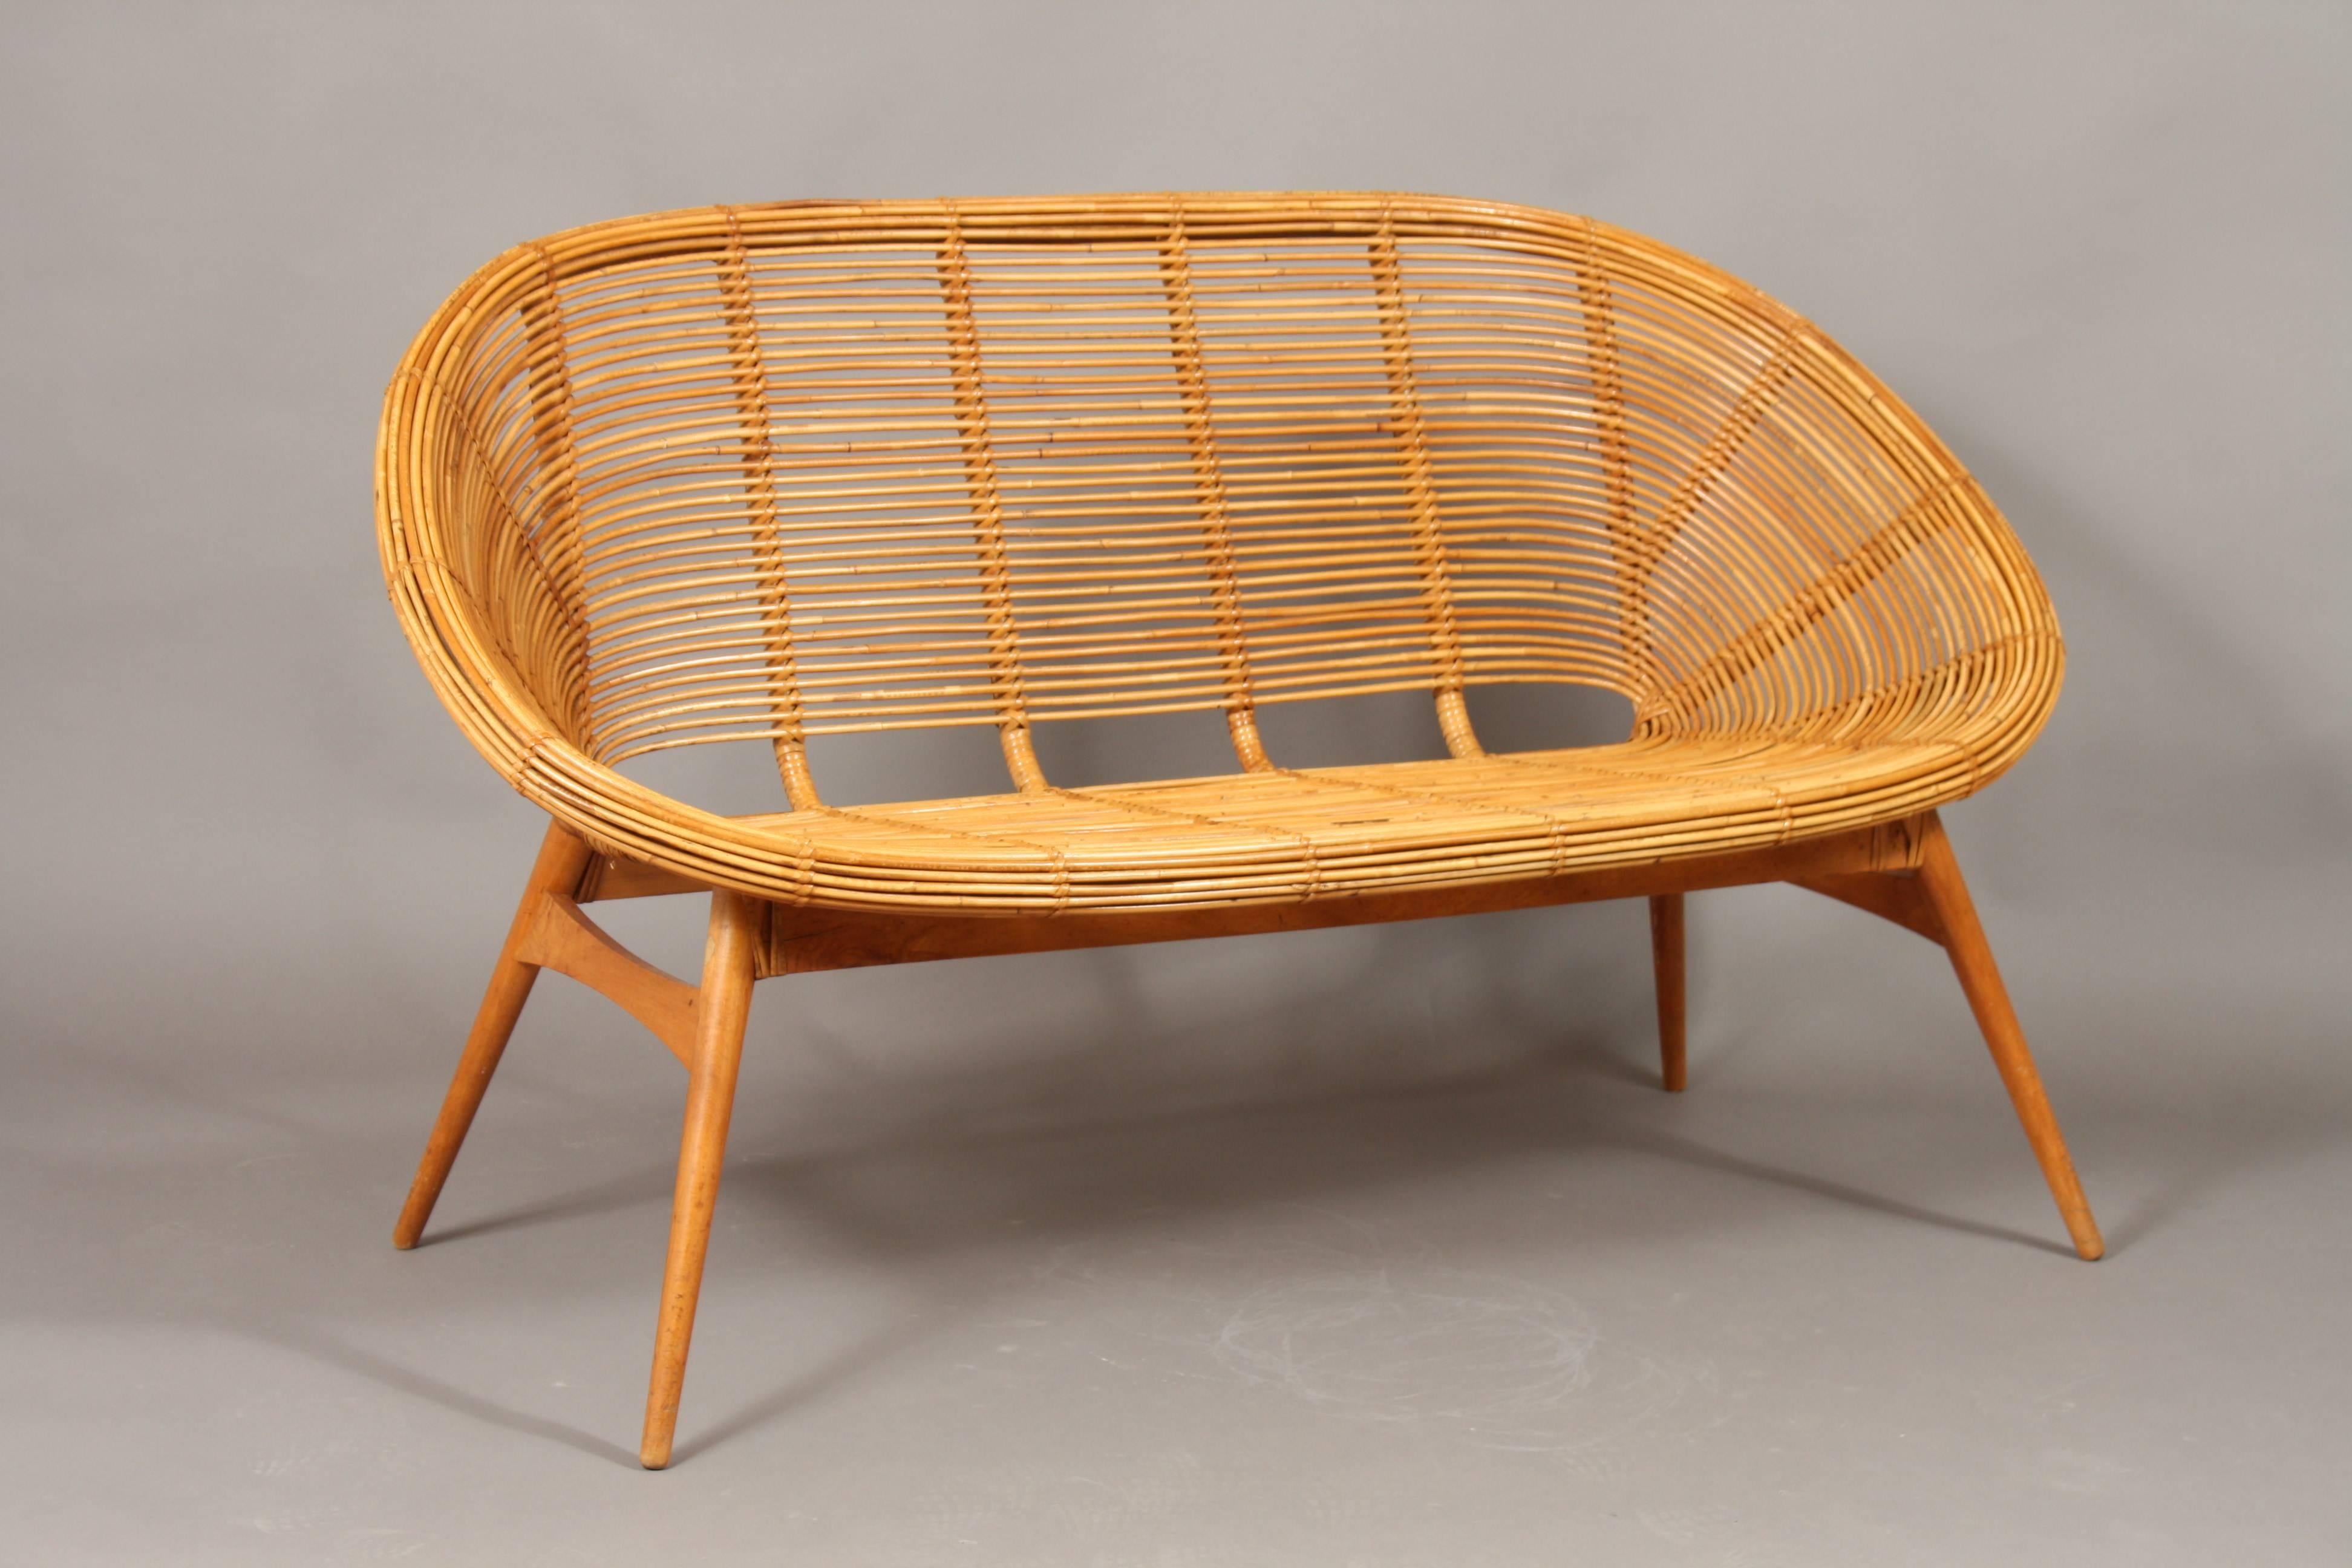 1960s Wicker Sofa with Teak Frame, Design from DDR 3